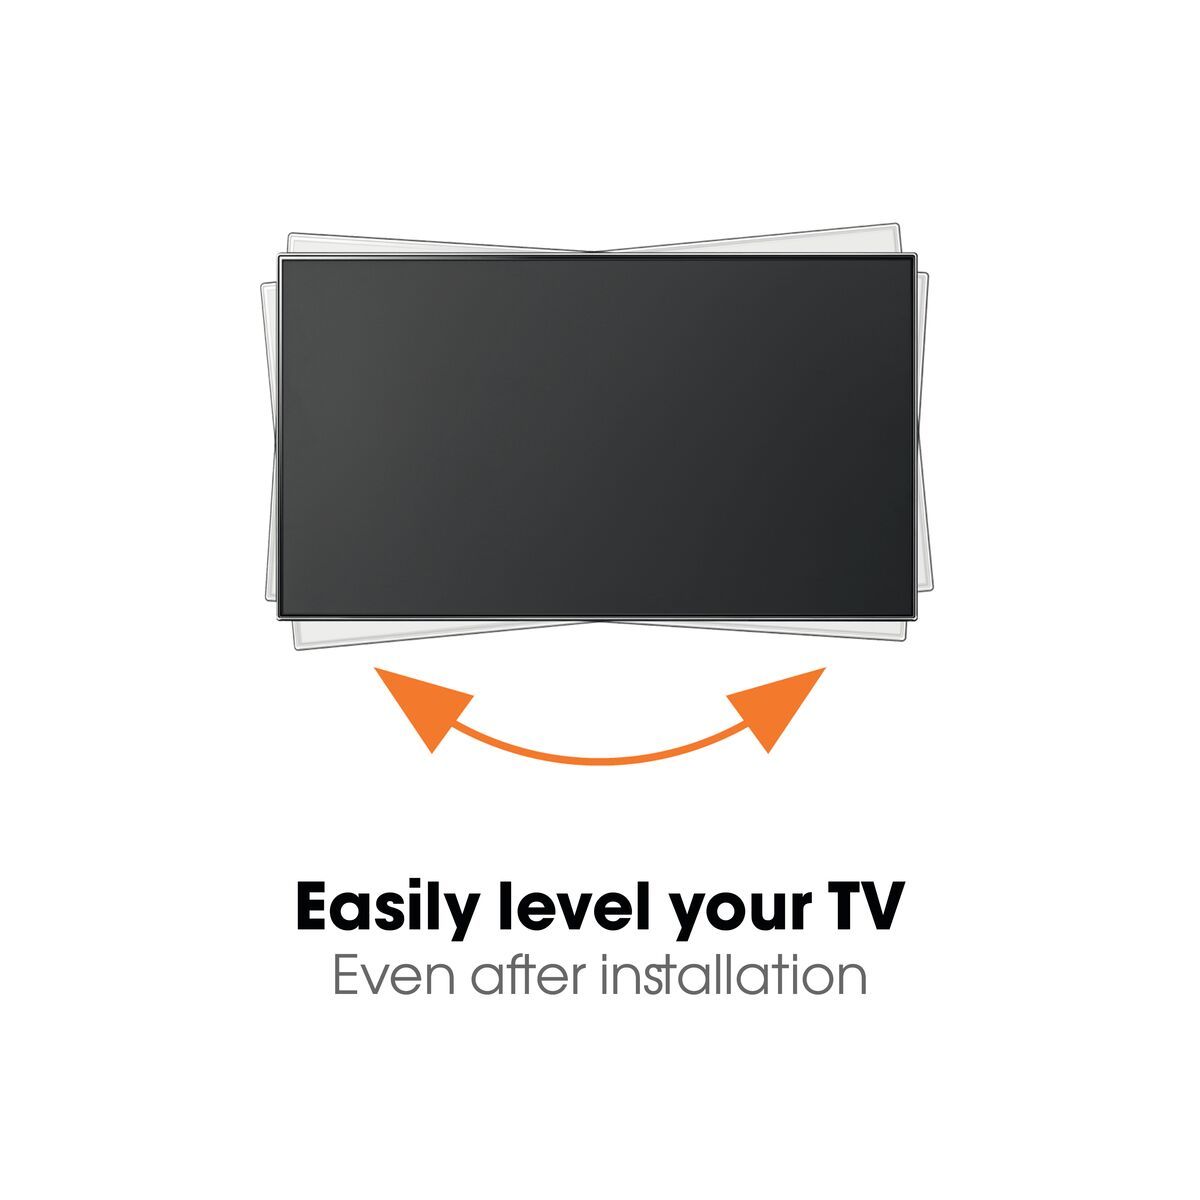 Vogel's WALL 3145 Full-Motion TV Wall Mount (black) - Suitable for 19 up to 43 inch TVs - Full motion (up to 180°) - Tilt -10°/+10° - USP